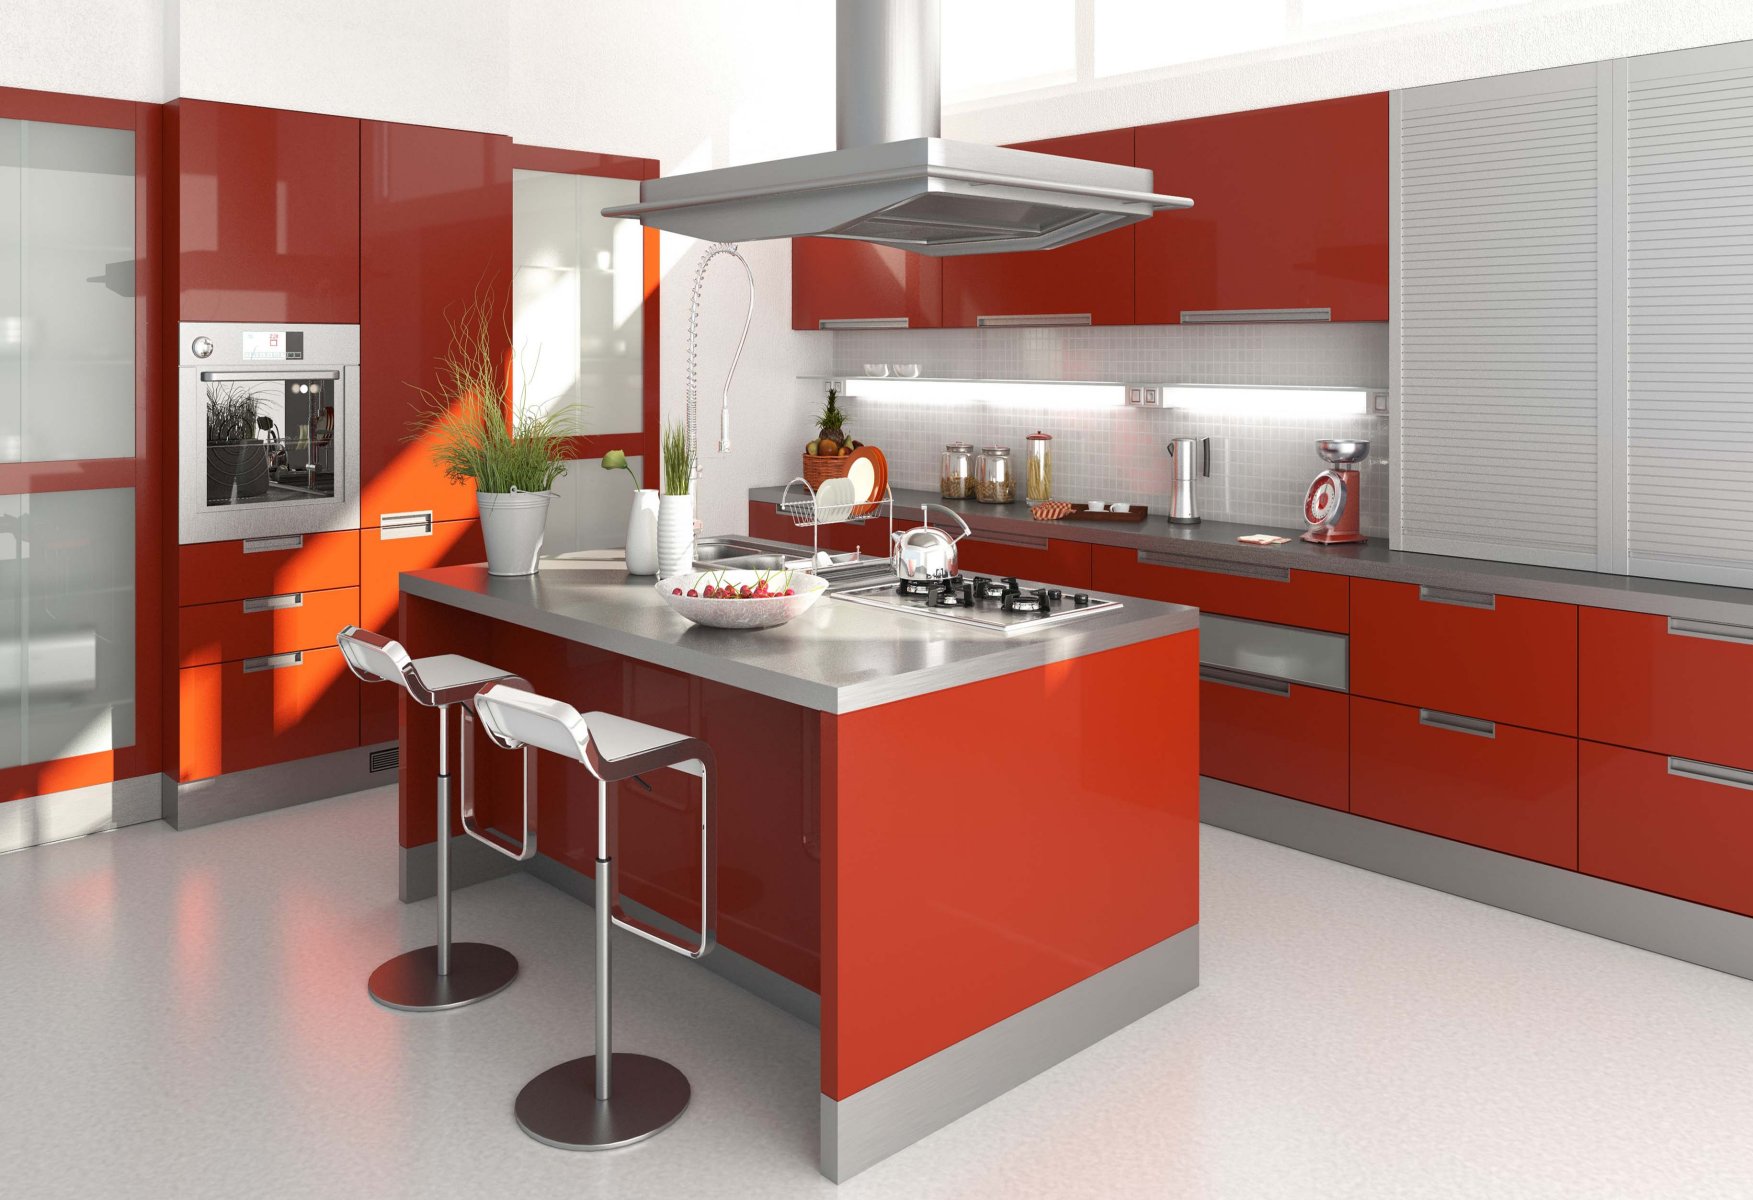 teal and red kitchen ideas